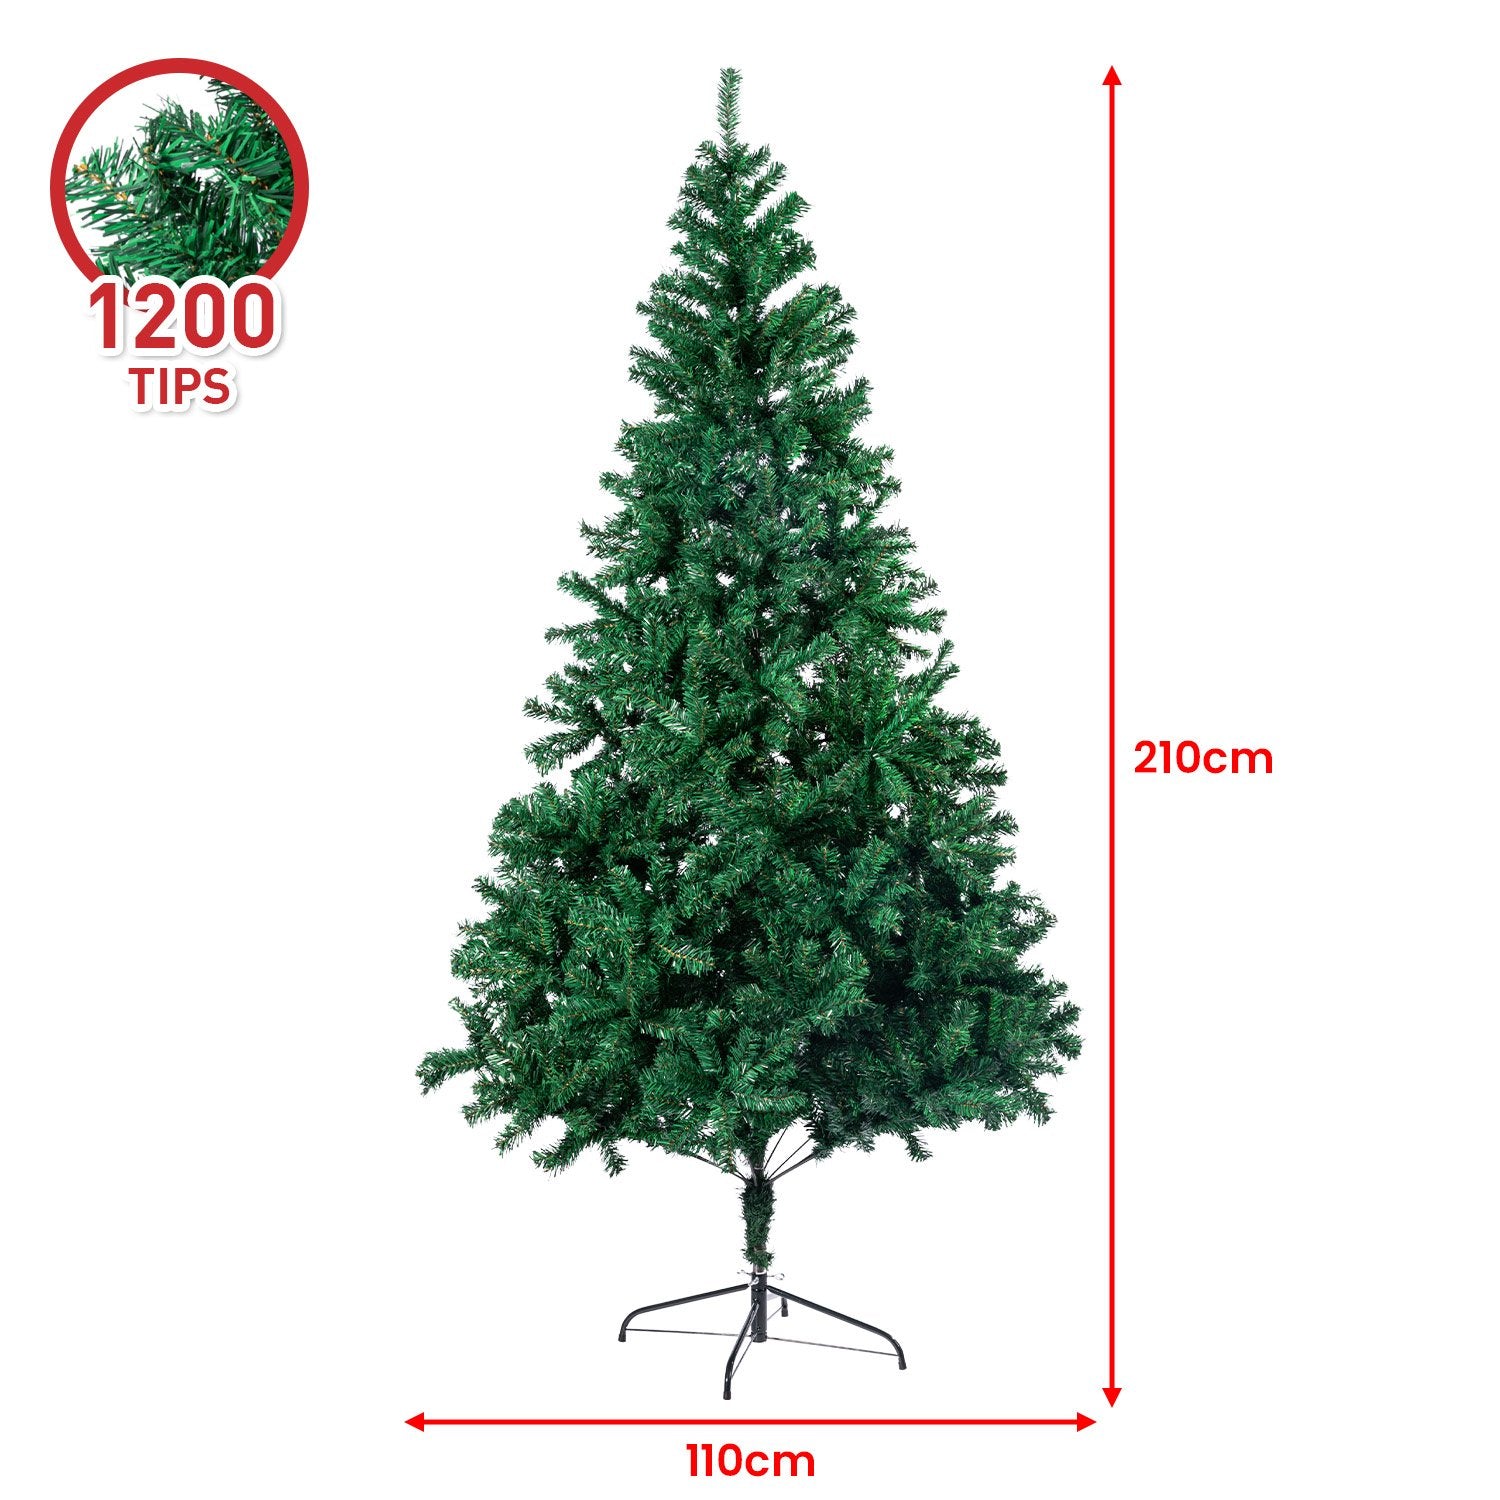 Christabelle Green Christmas Tree 2.1m Xmas Decor Decorations -1200 Tips - SILBERSHELL